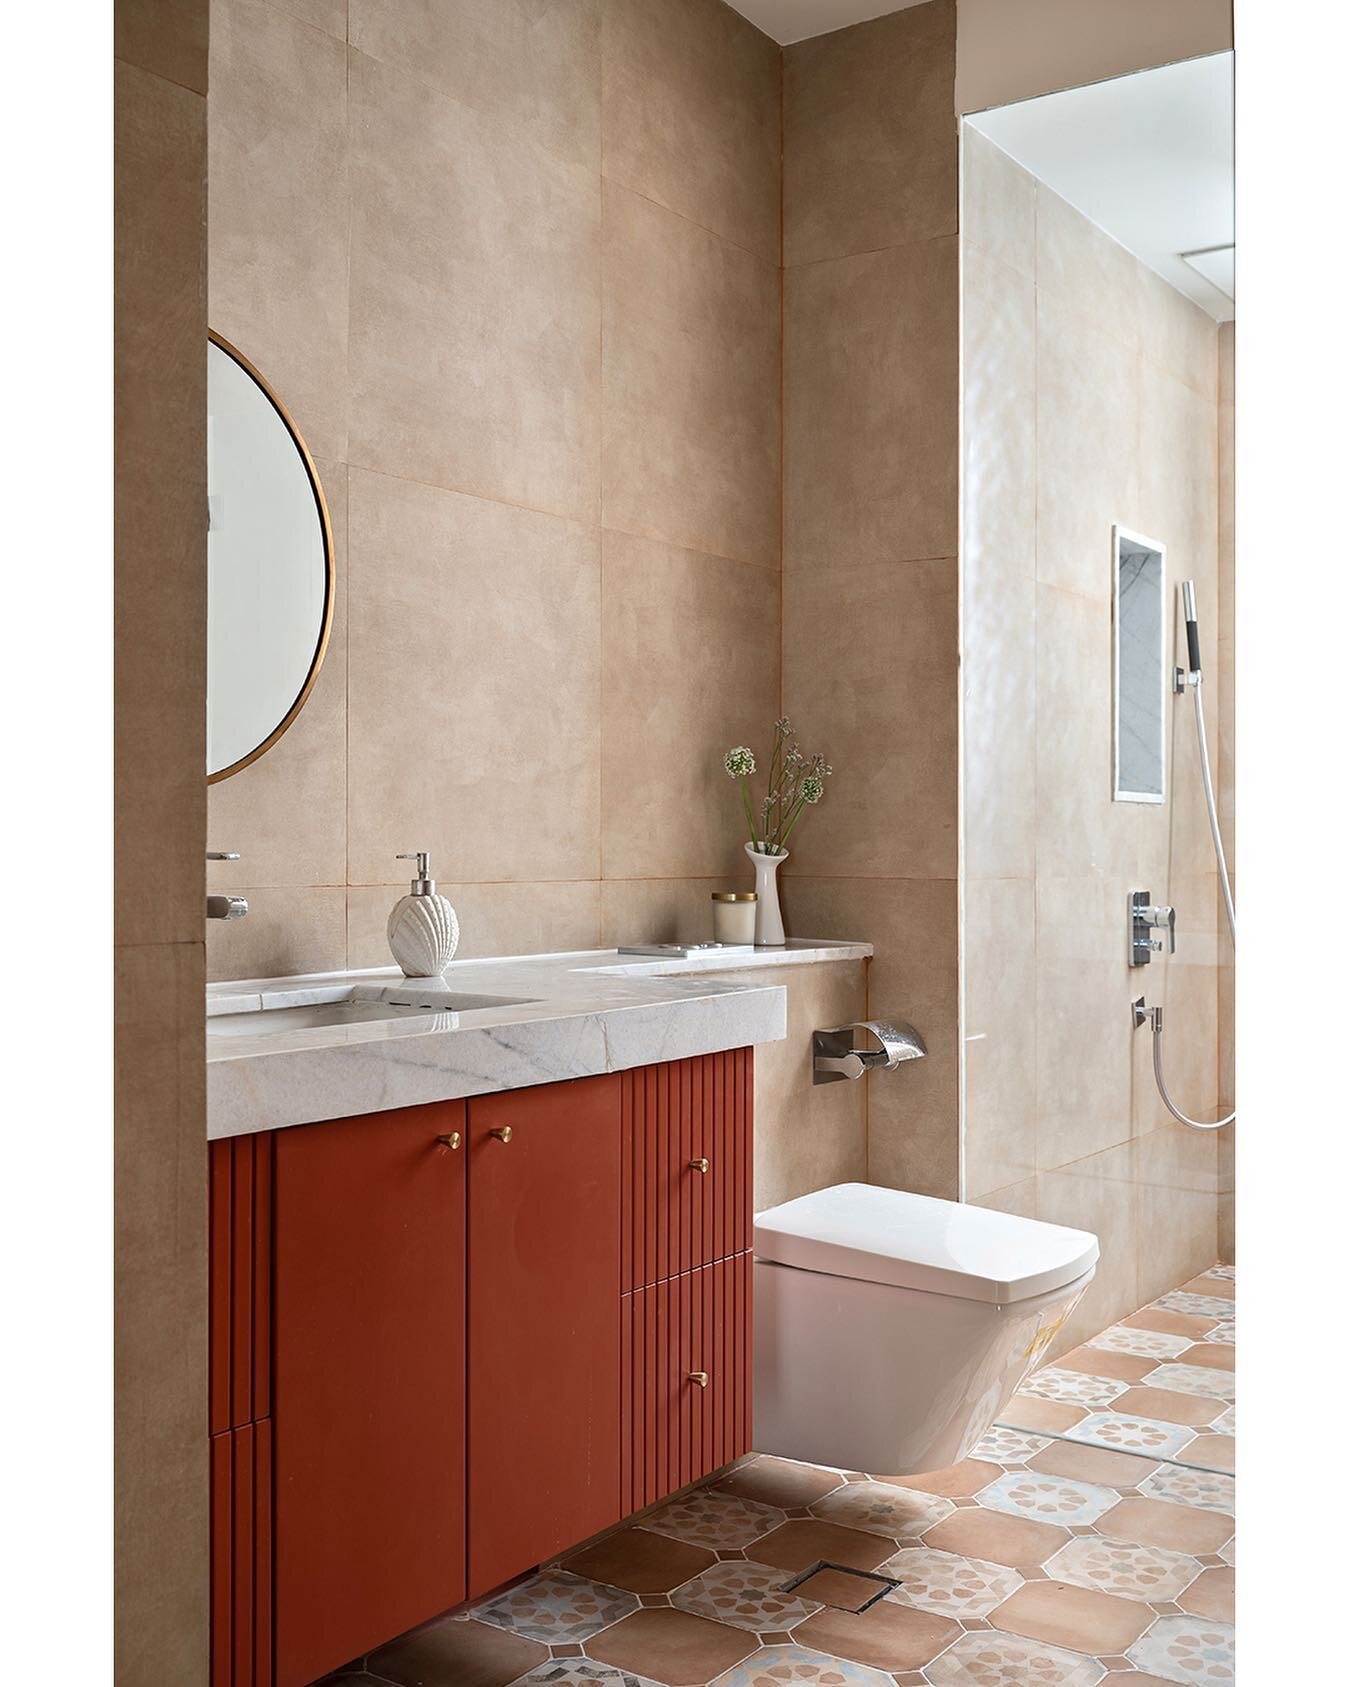 Extending the mellow sentiment, the grandmother&rsquo;s bathroom is reimagined to channel grace and potency of colour. Beige wall tiles and light sepia inlay-laden floor tiles comprise the visual, paired with the toasty terracotta hue that washes ove